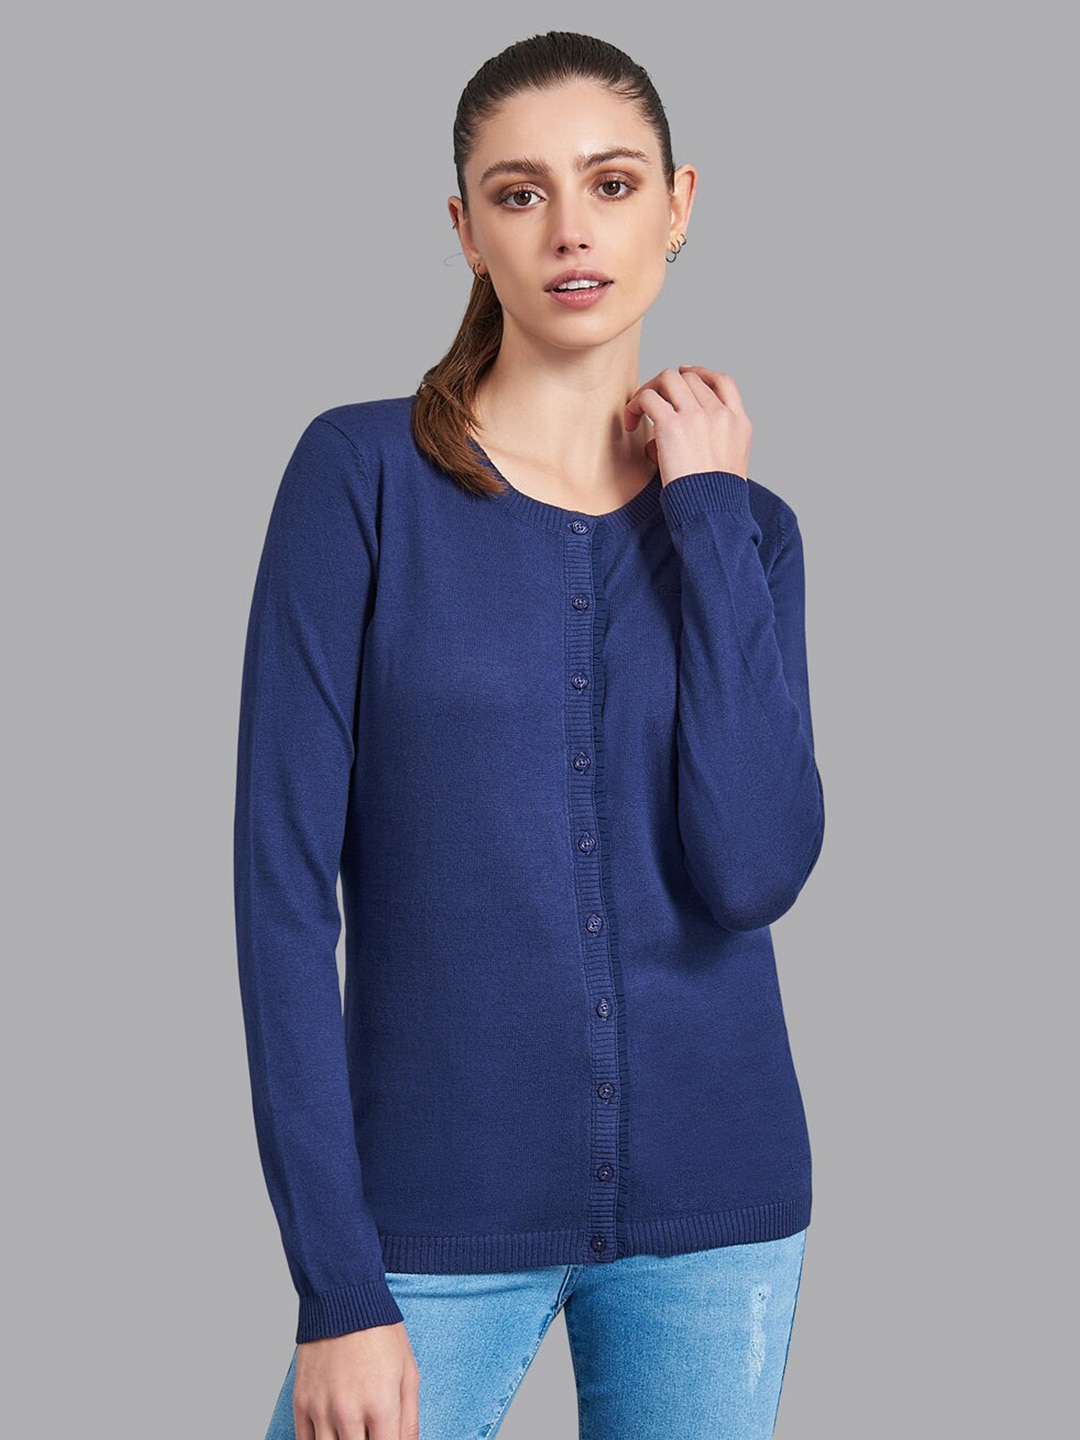 Beverly Hills Polo Club Women Navy Blue Cotton Cardigan Price in India